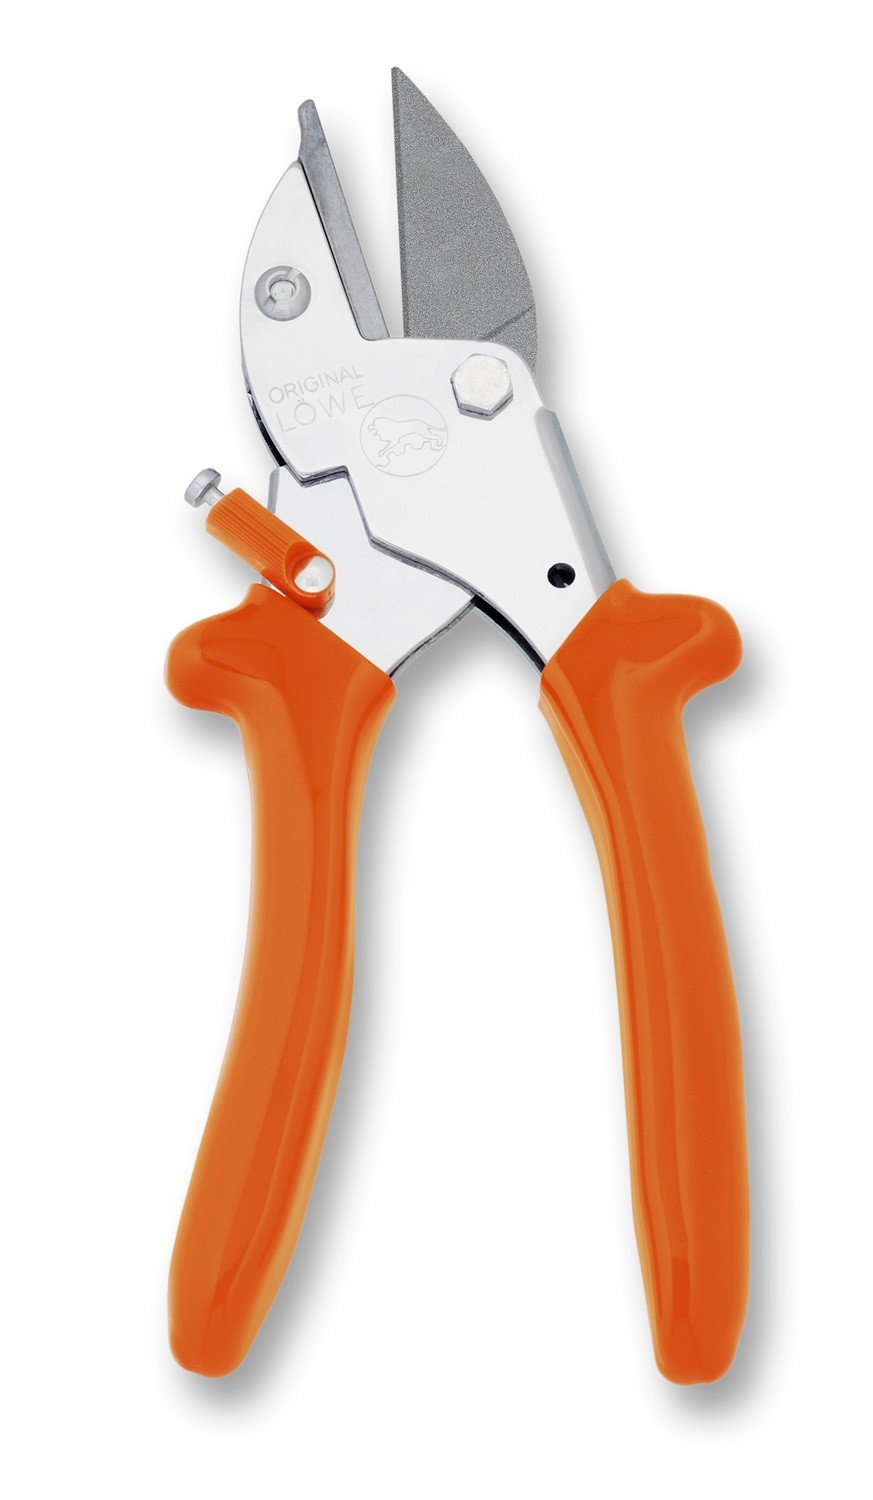 LÖWE 5.127 Small ergonomic anvil pruner with pointed blade